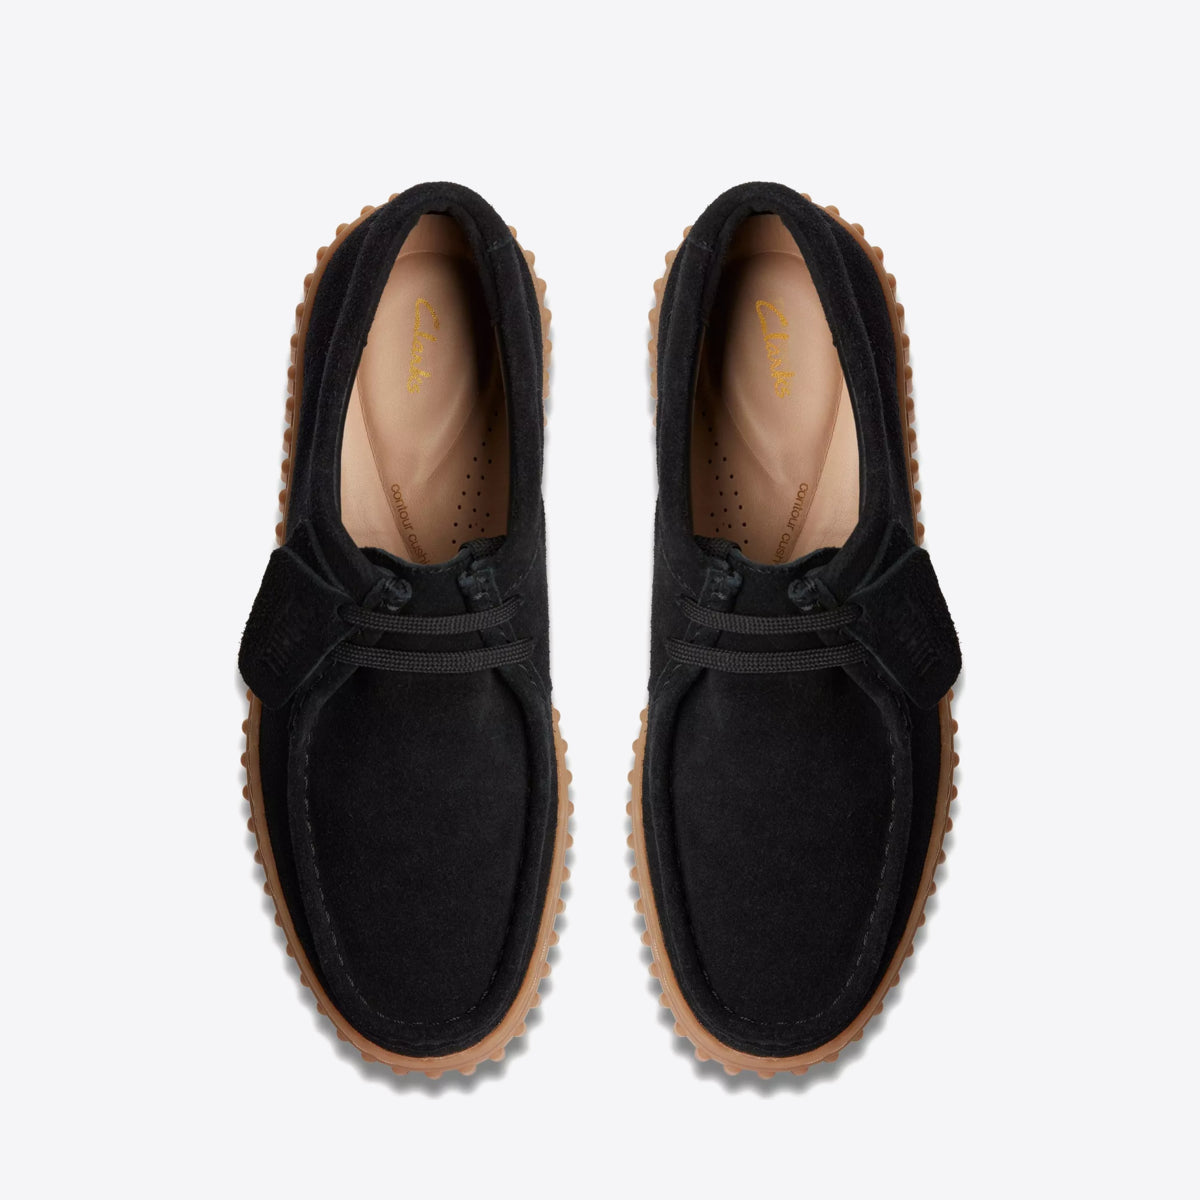 CLARKS Womens Torhill Bee Black Suede - Image 6